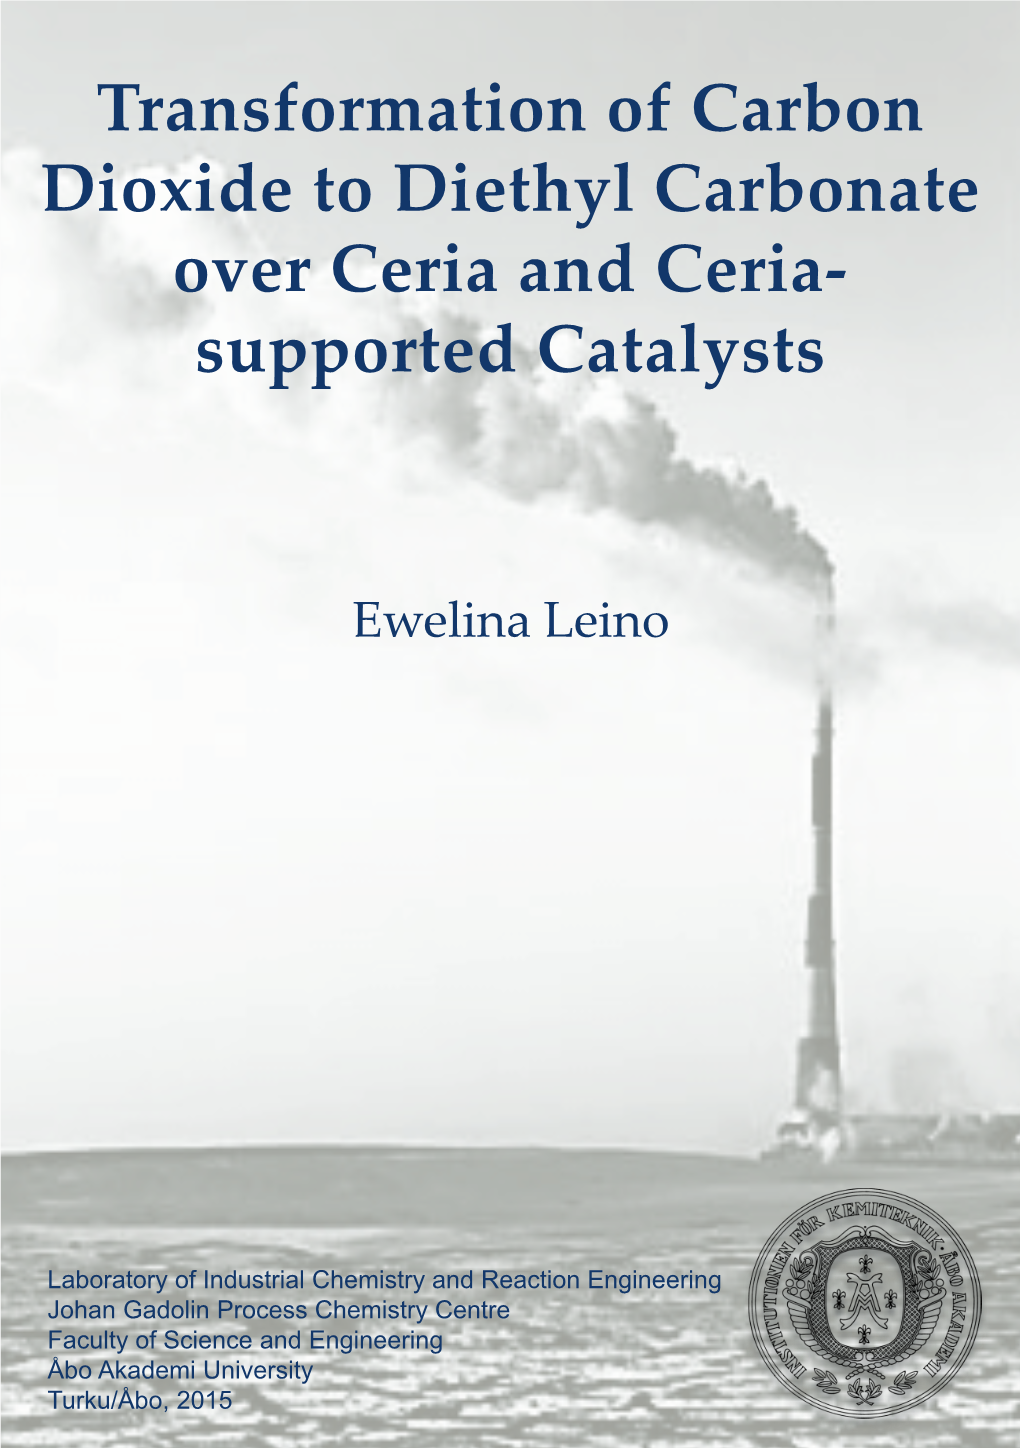 Transformation of Carbon Dioxide to Diethyl Carbonate Over Ceria and Ceria Supported Catalysts